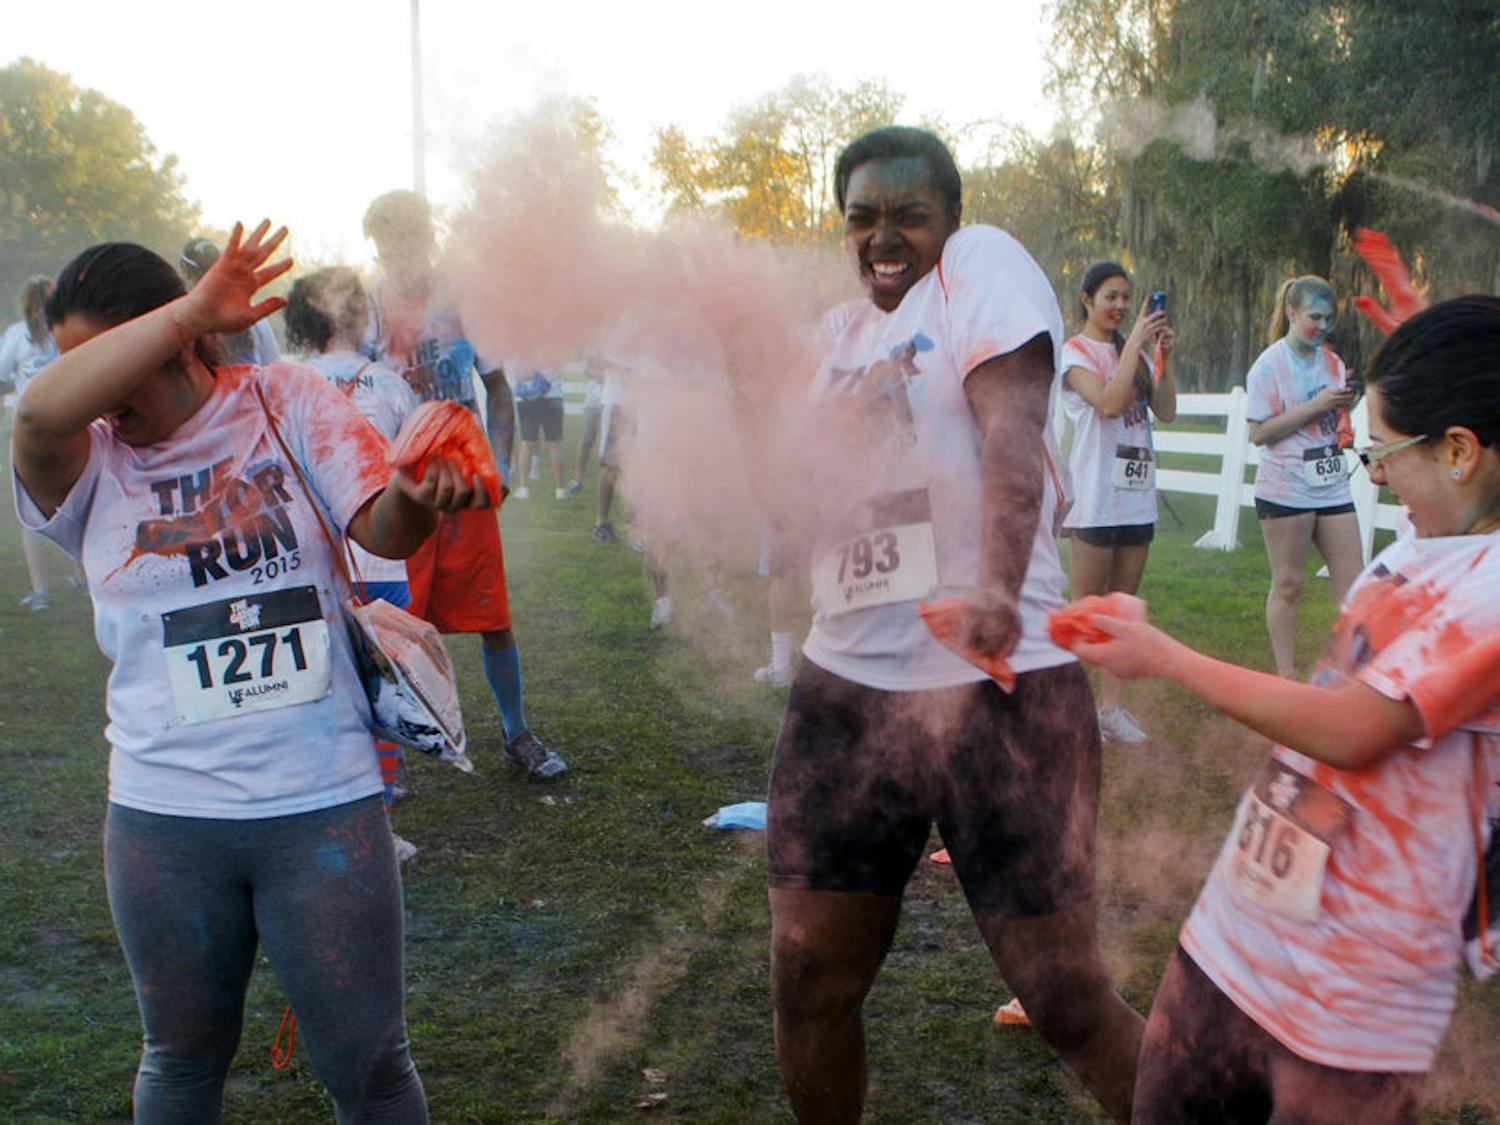 From left: Ami Wang, 20, Chelsi Gaskin, 20, and Valentina Varela, 19, all UF students, throw bags of orange corn starch at each other on Flavet Field after running their first Gator Run.